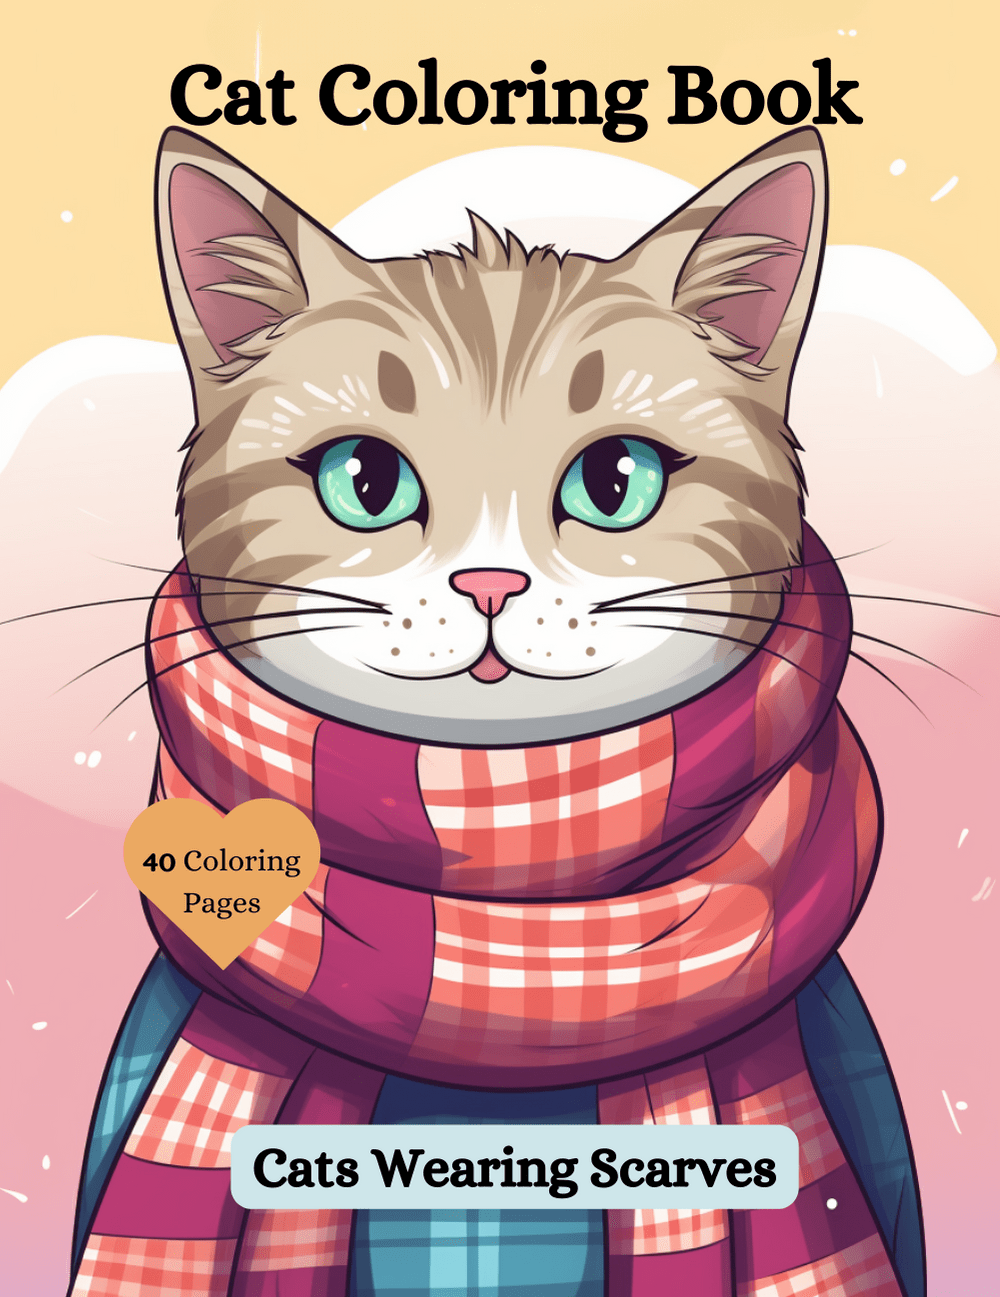 Cat Coloring Book | Cats Wearing Scarves